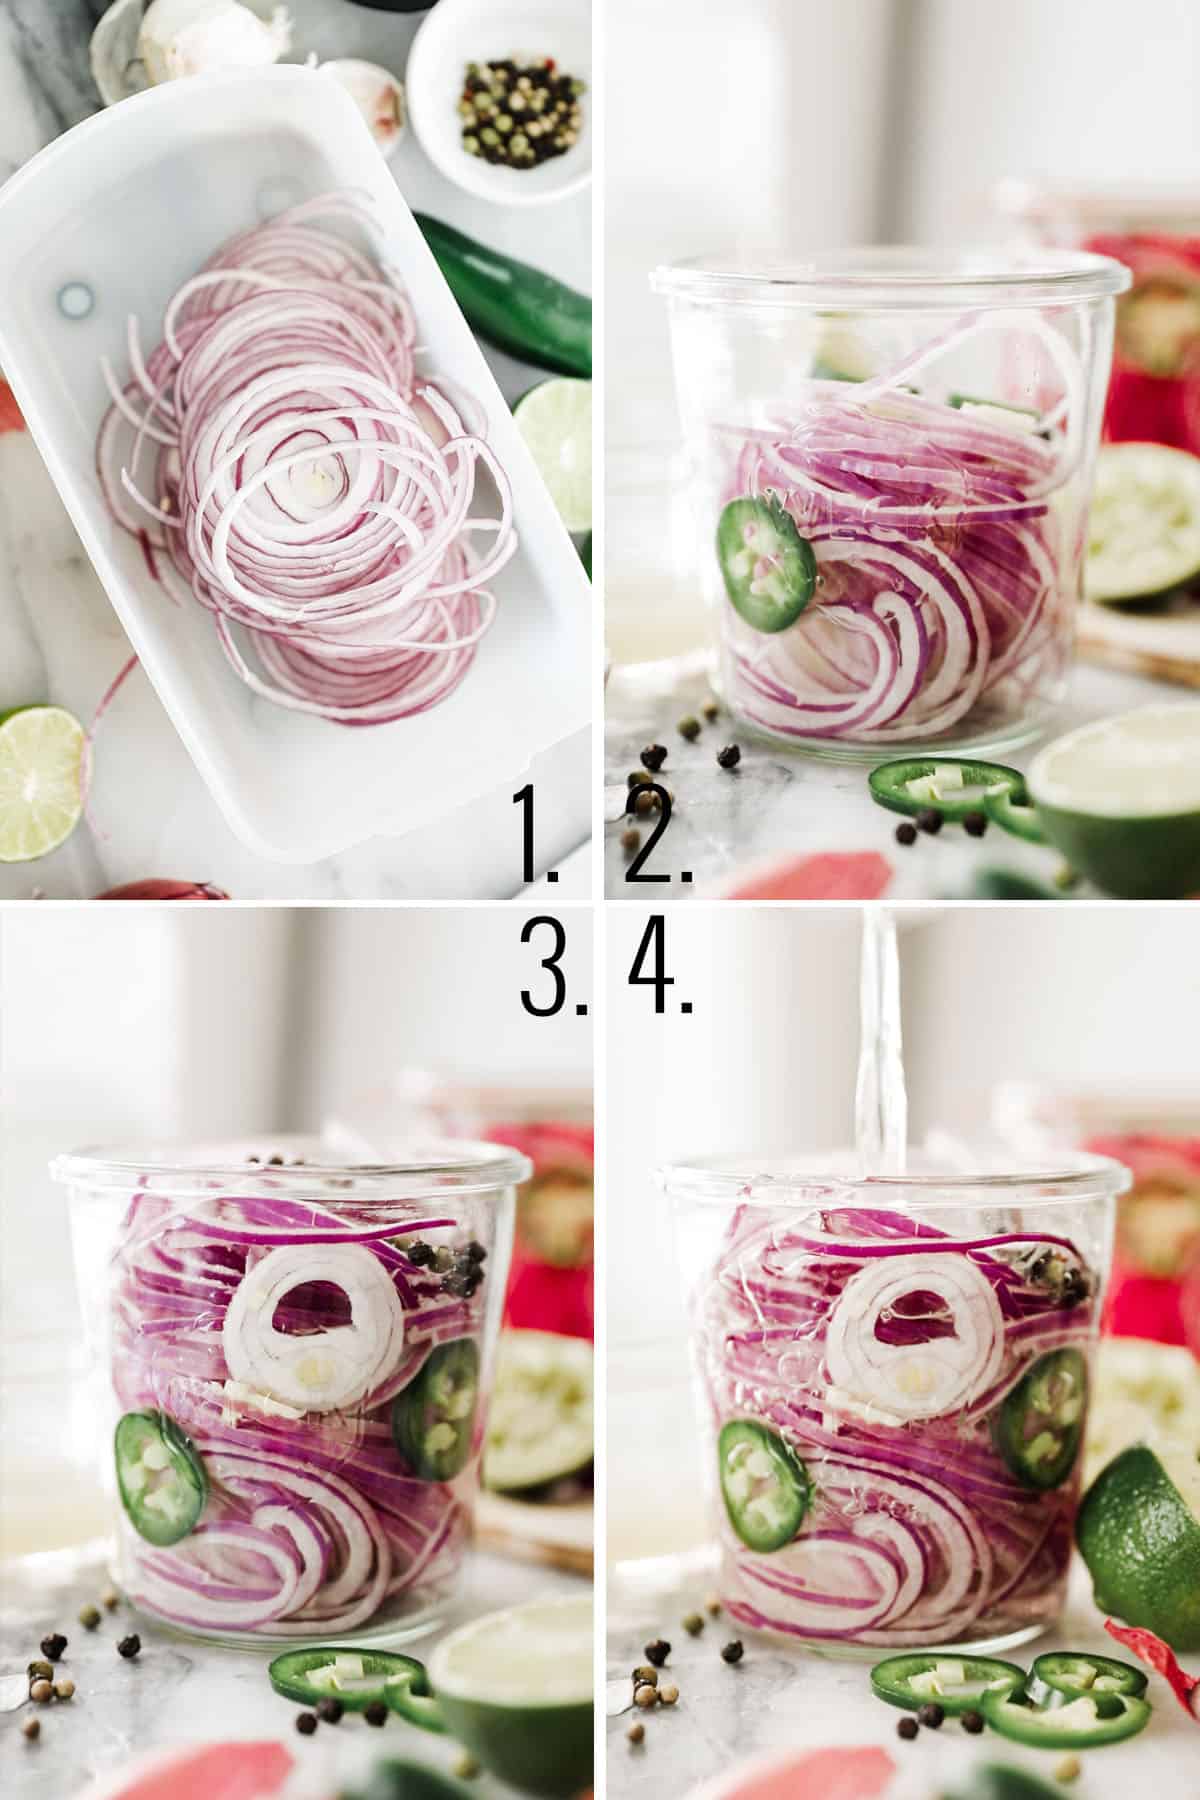 Four photos showing adding thinly sliced red onions and other ingredients into a glass jar.